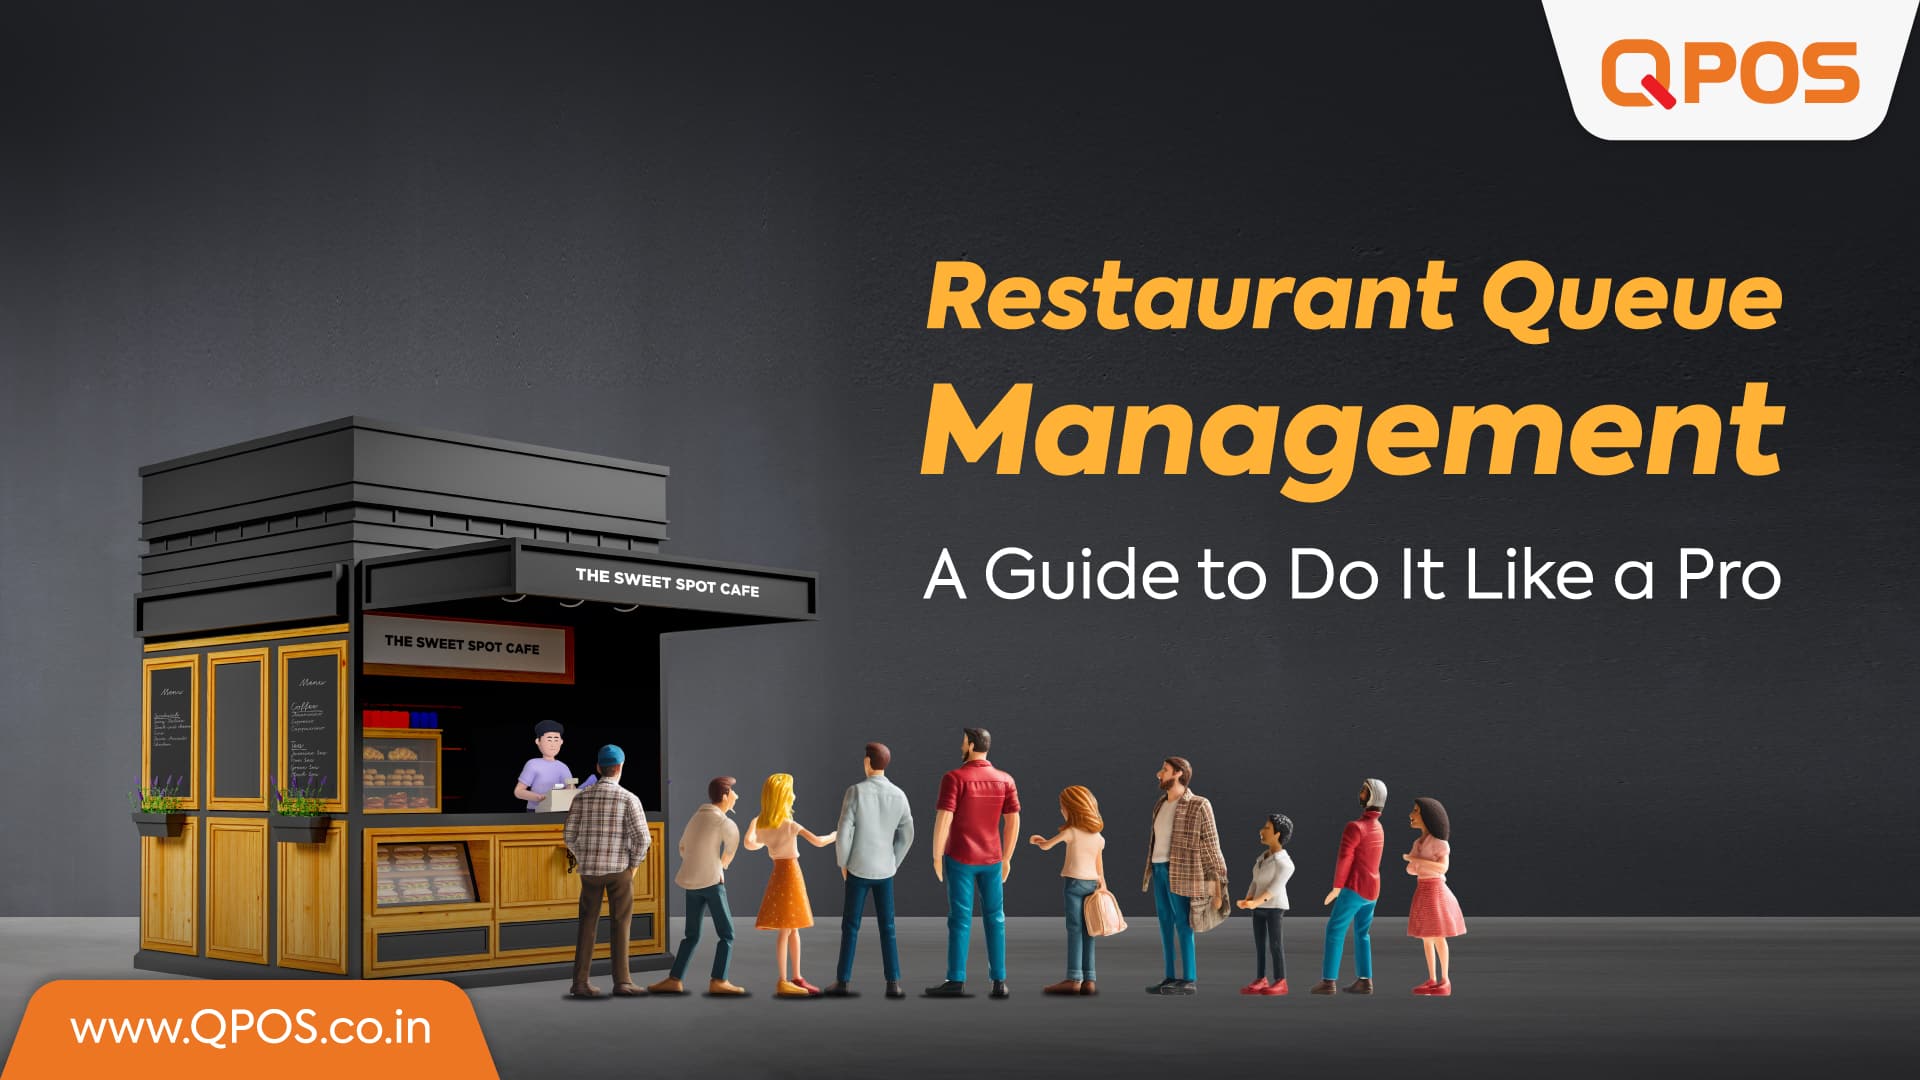 Restaurant Queue Management – A Guide to Do It Like a Pro